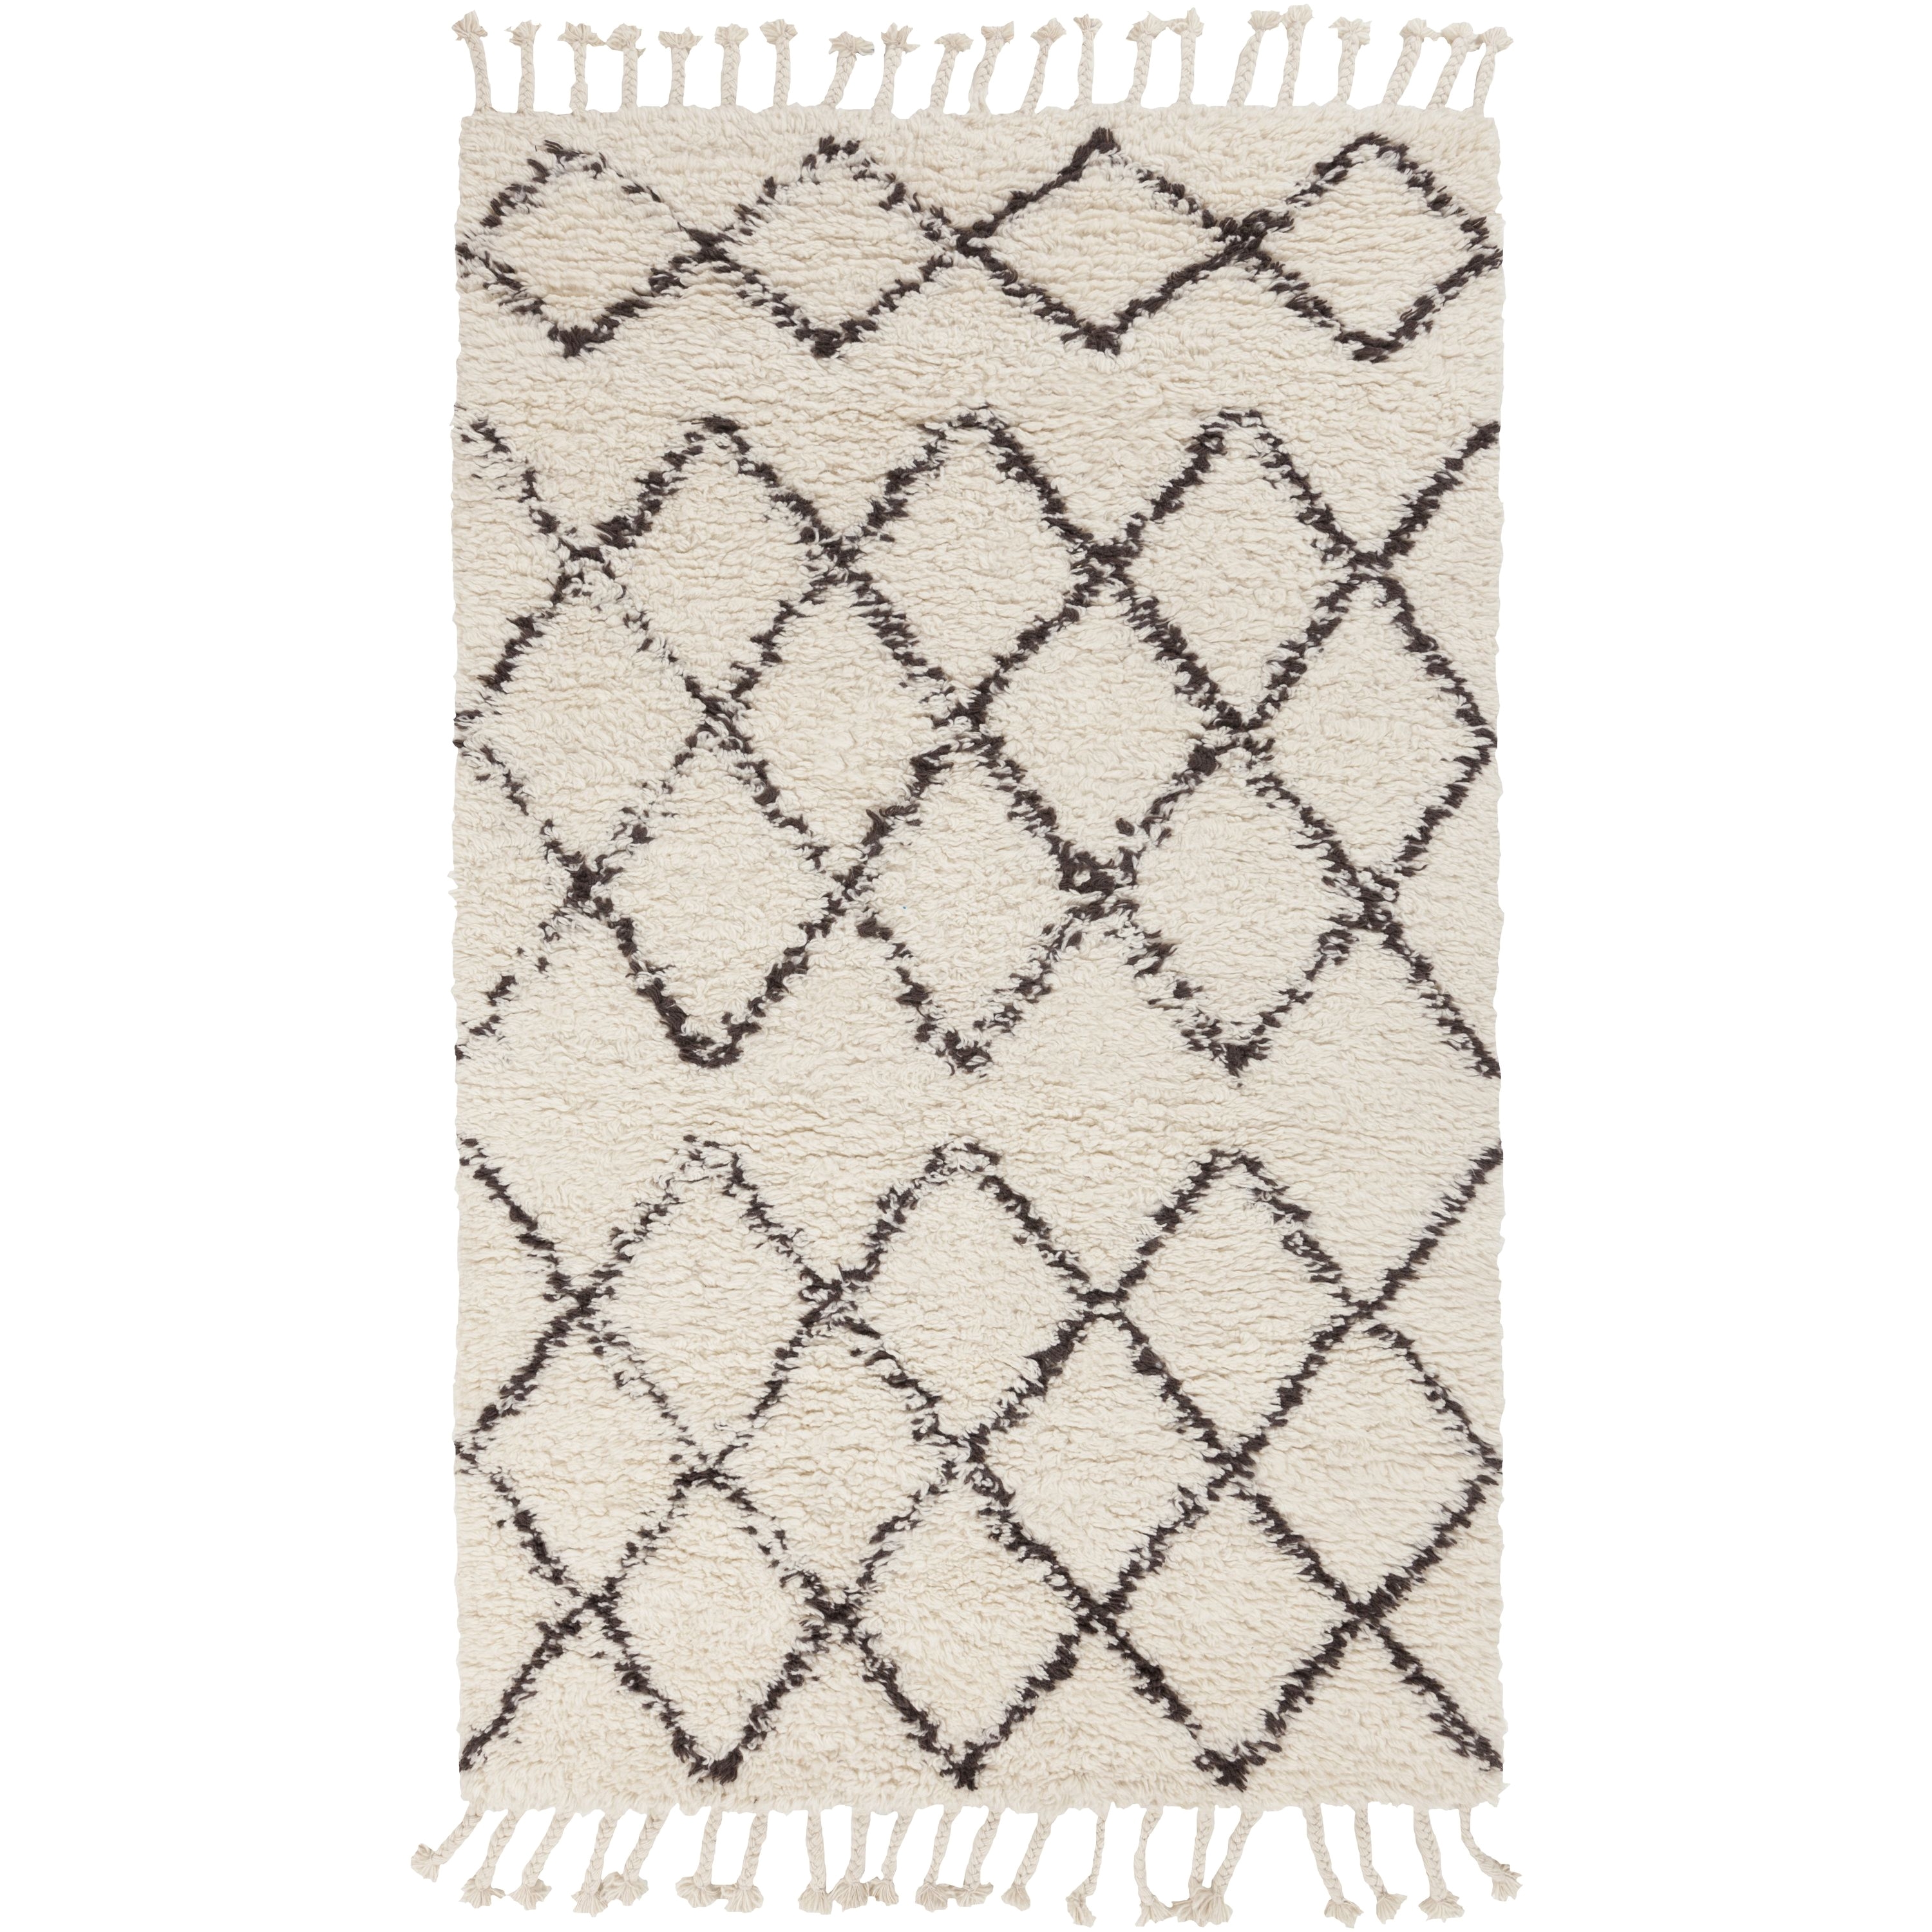 this textured moroccan rug with a simple pattern design with freshen up your floor space dress it up with a cozy throw and vintage textile pillows